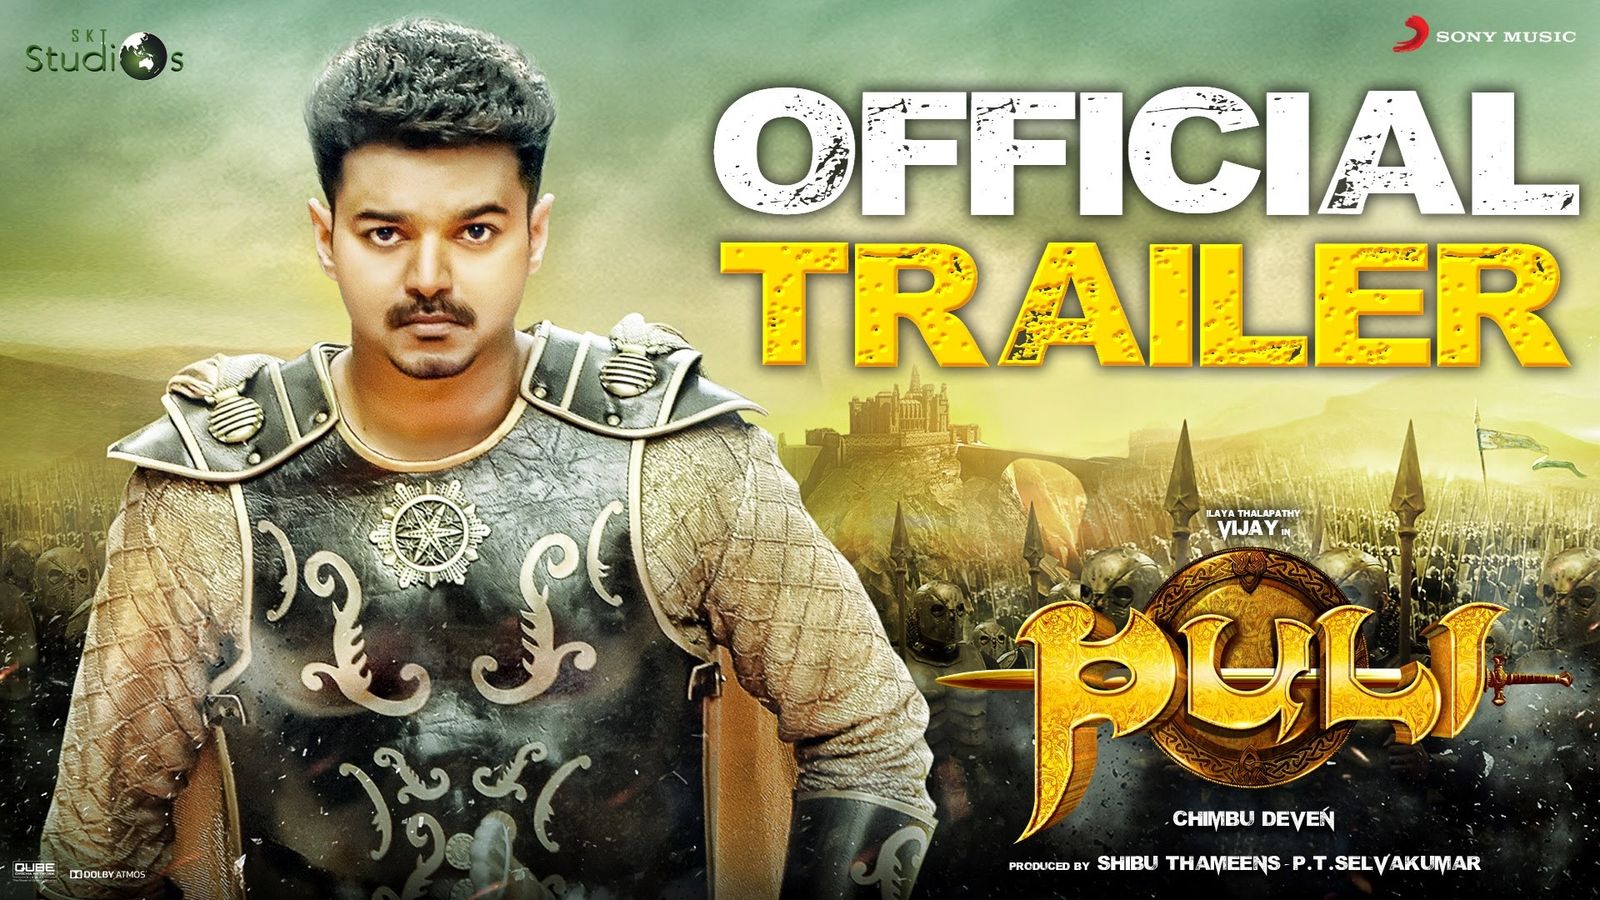 Second Trailer Of ‘Puli’ Also Gets Good Response